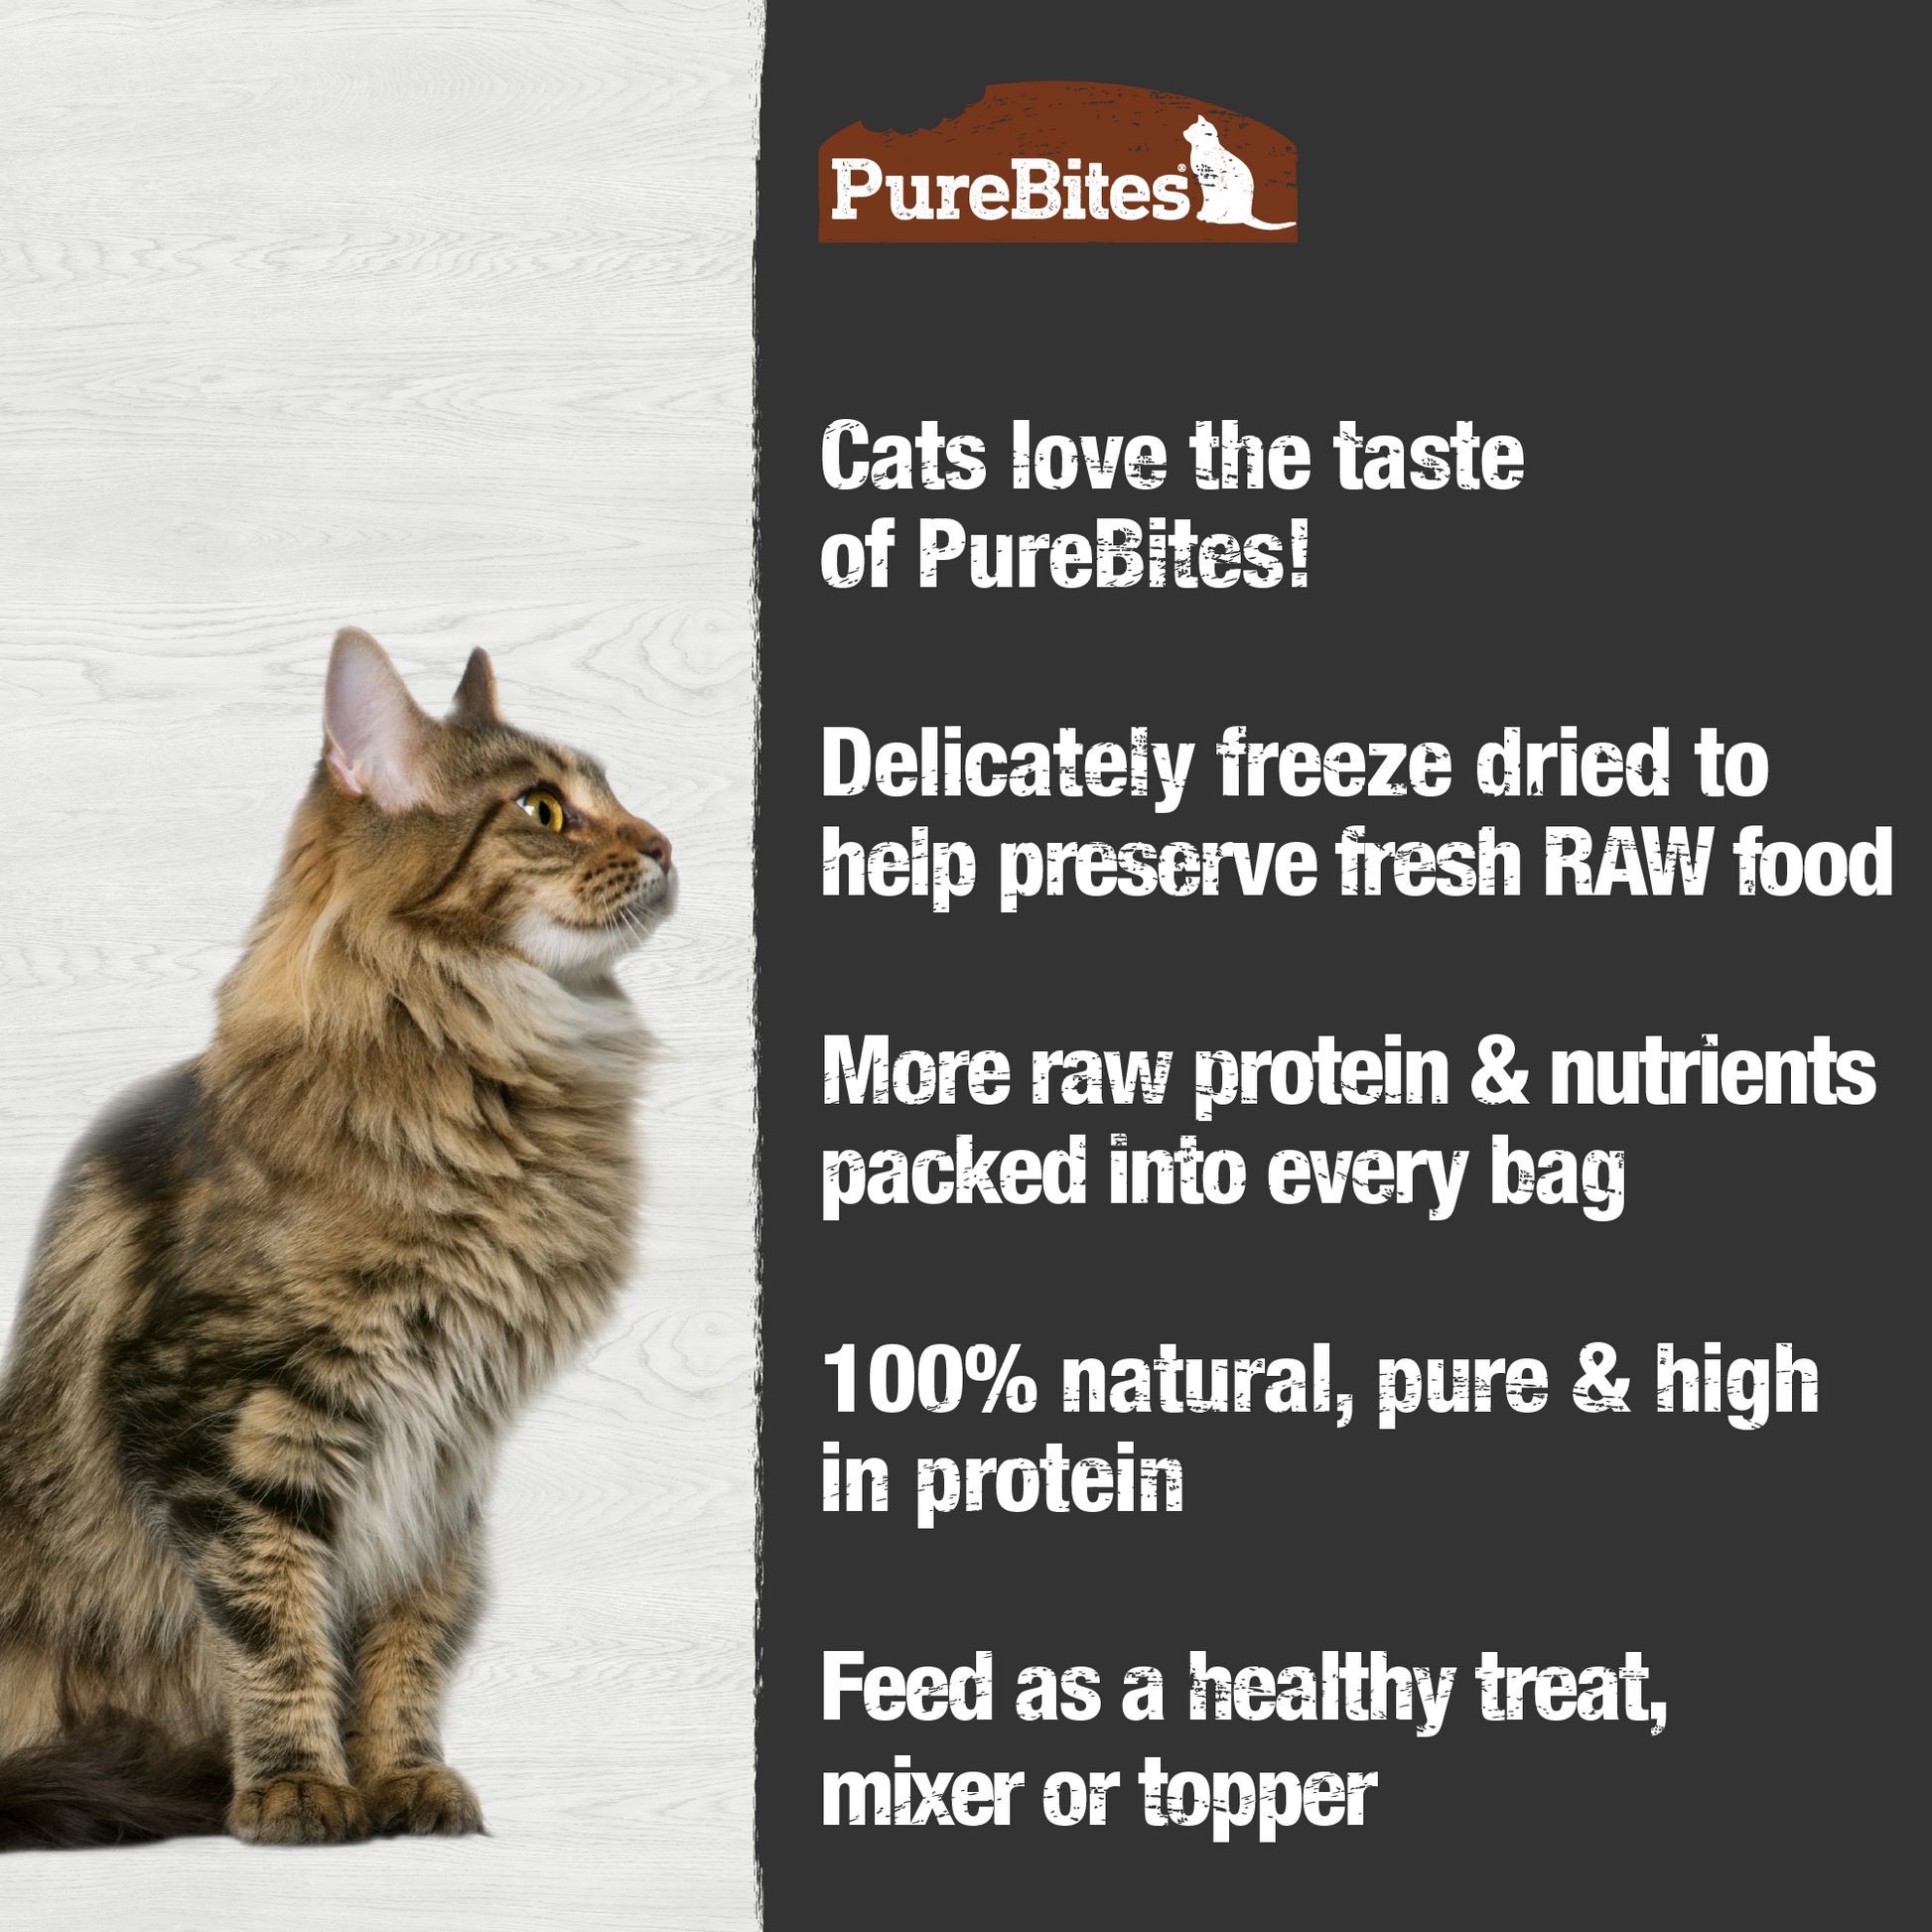 Made fresh & pure means more RAW protein and nutrients packed into every bag. Our turkey is freeze dried to help preserve its RAW taste, and nutrition, and mirror a cat’s ancestral diet